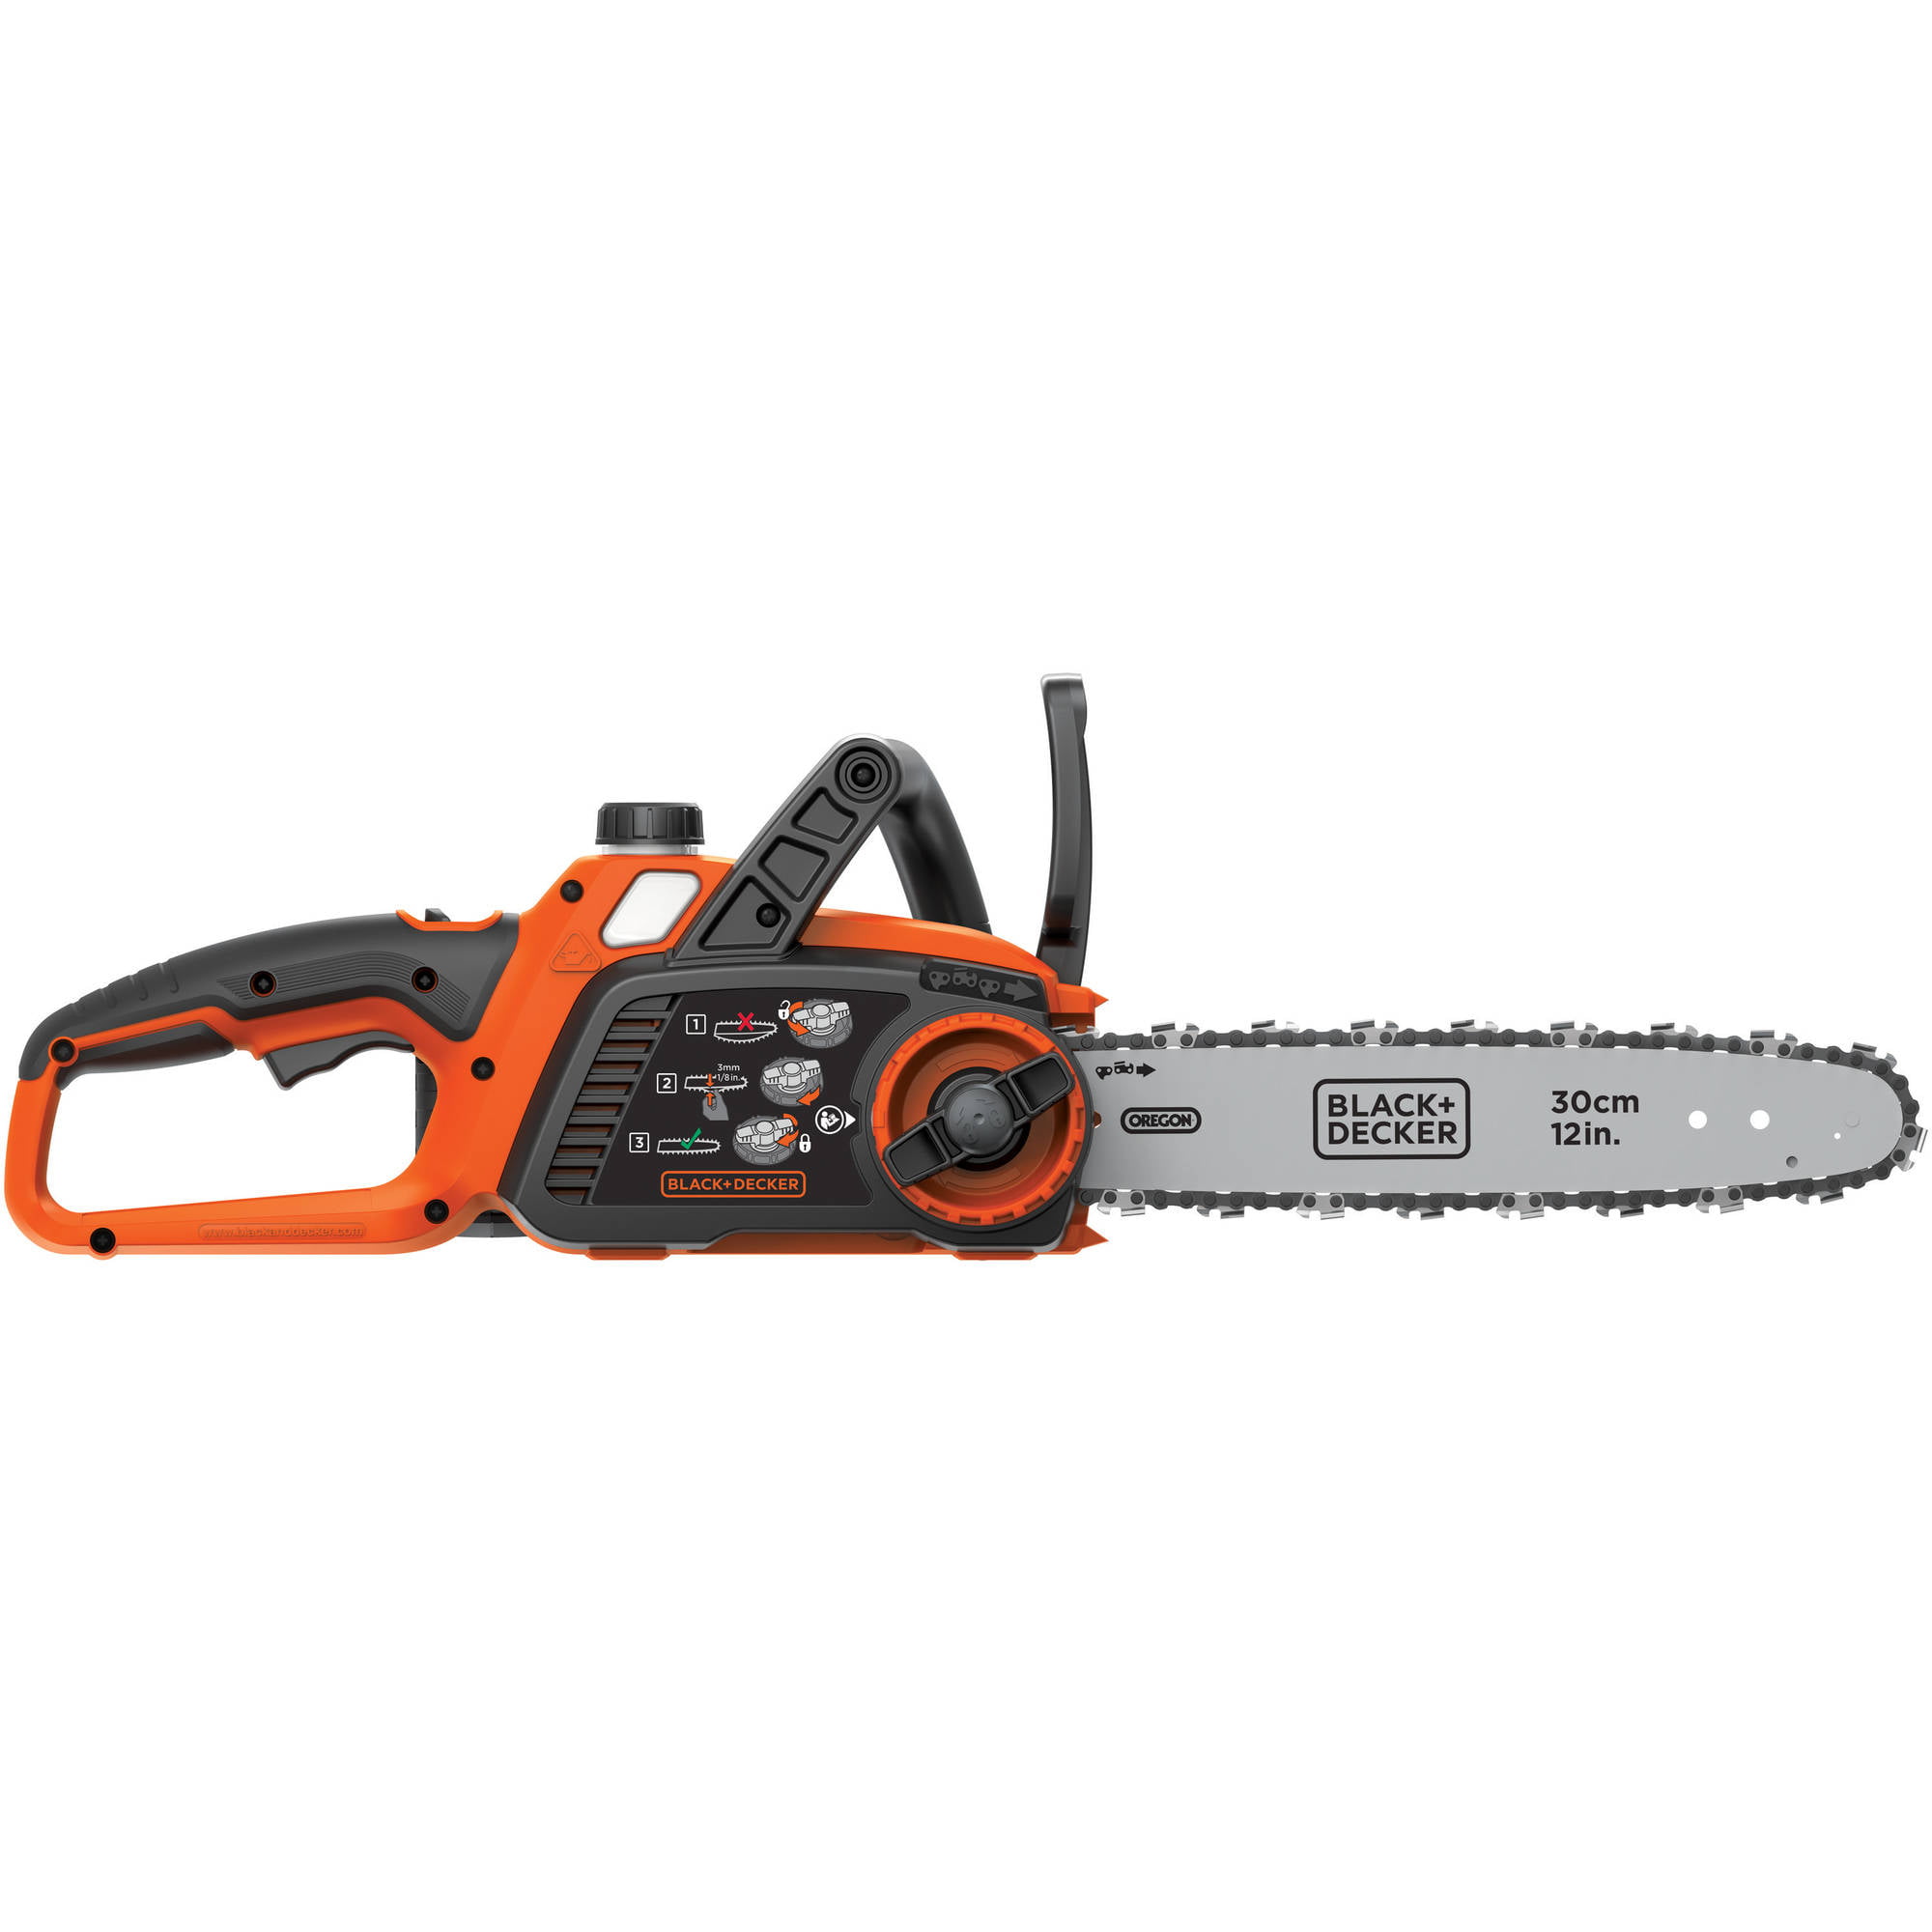 Black & Decker calar saw 12V BDCJS12N does not include charger or battery